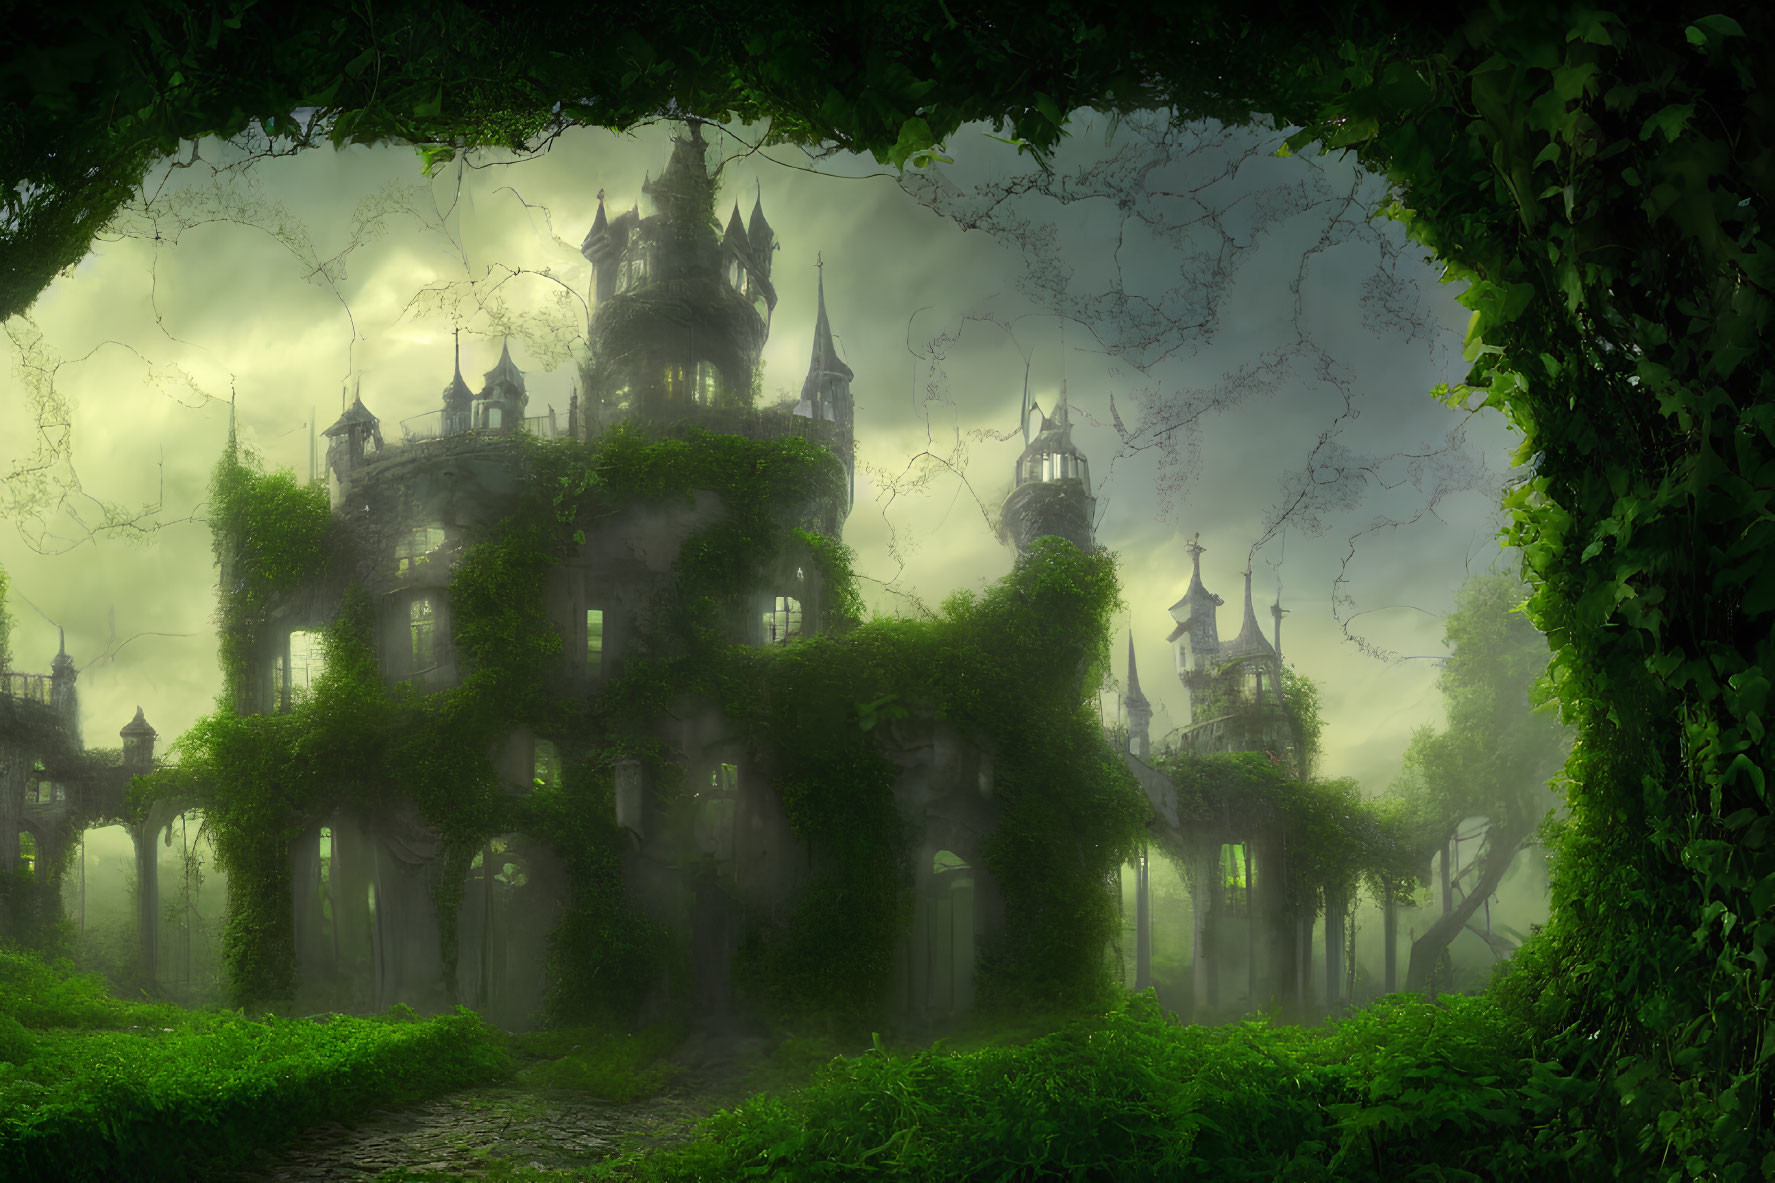 Mystical castle covered in green ivy nestled in lush forest